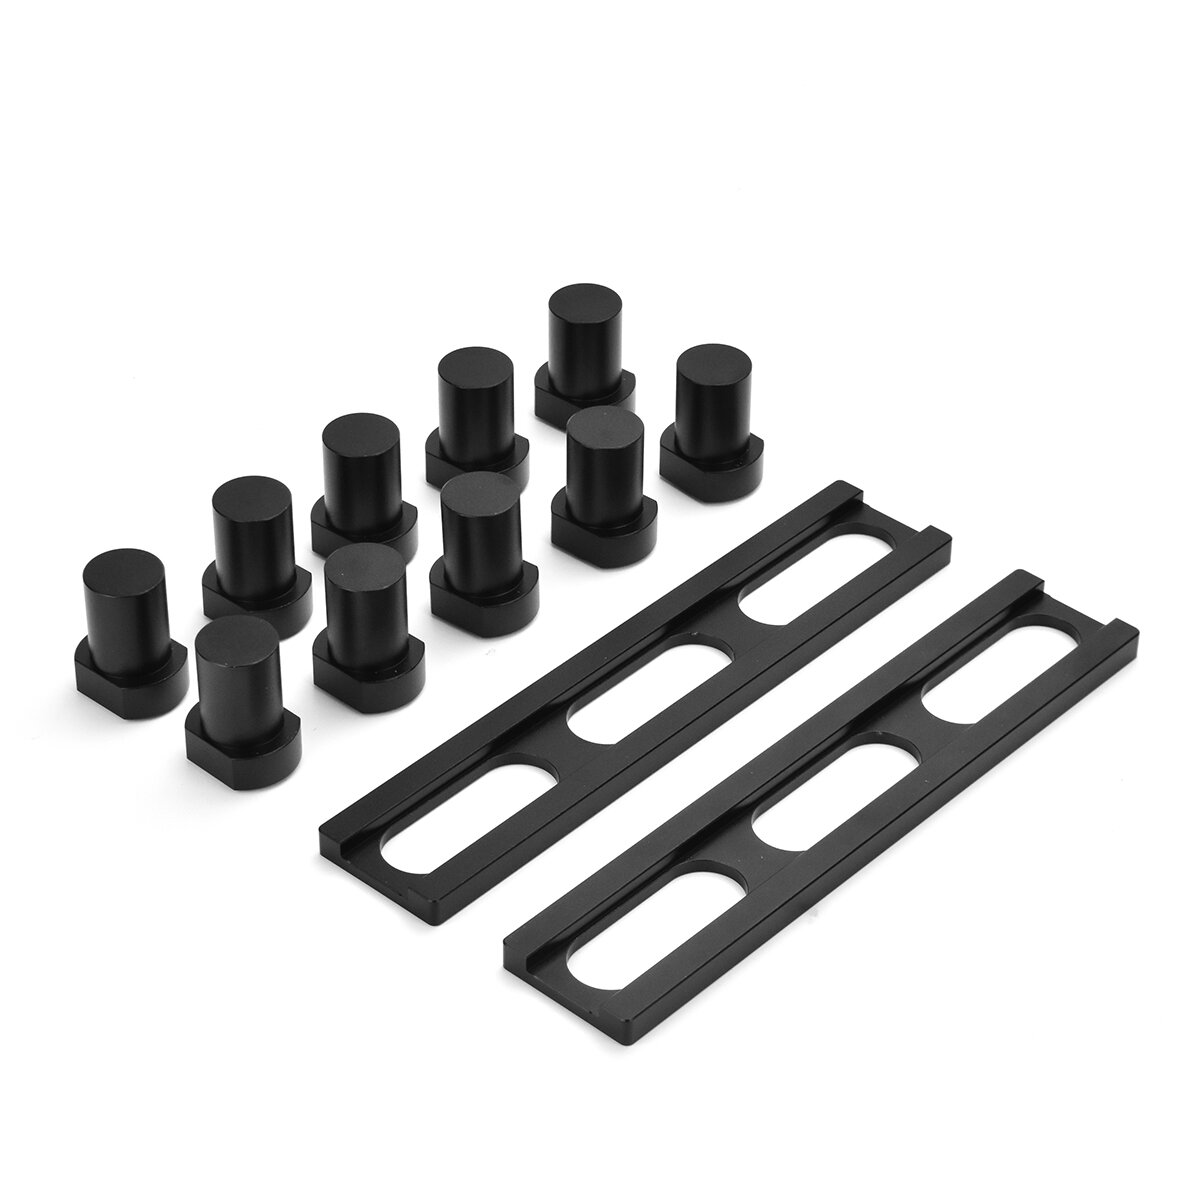 Image of Fonson Woodworking Planing Stop with 10pcs Dog Hole Bench Dog Clamp Desktop Tenon Workbench Table Accessories